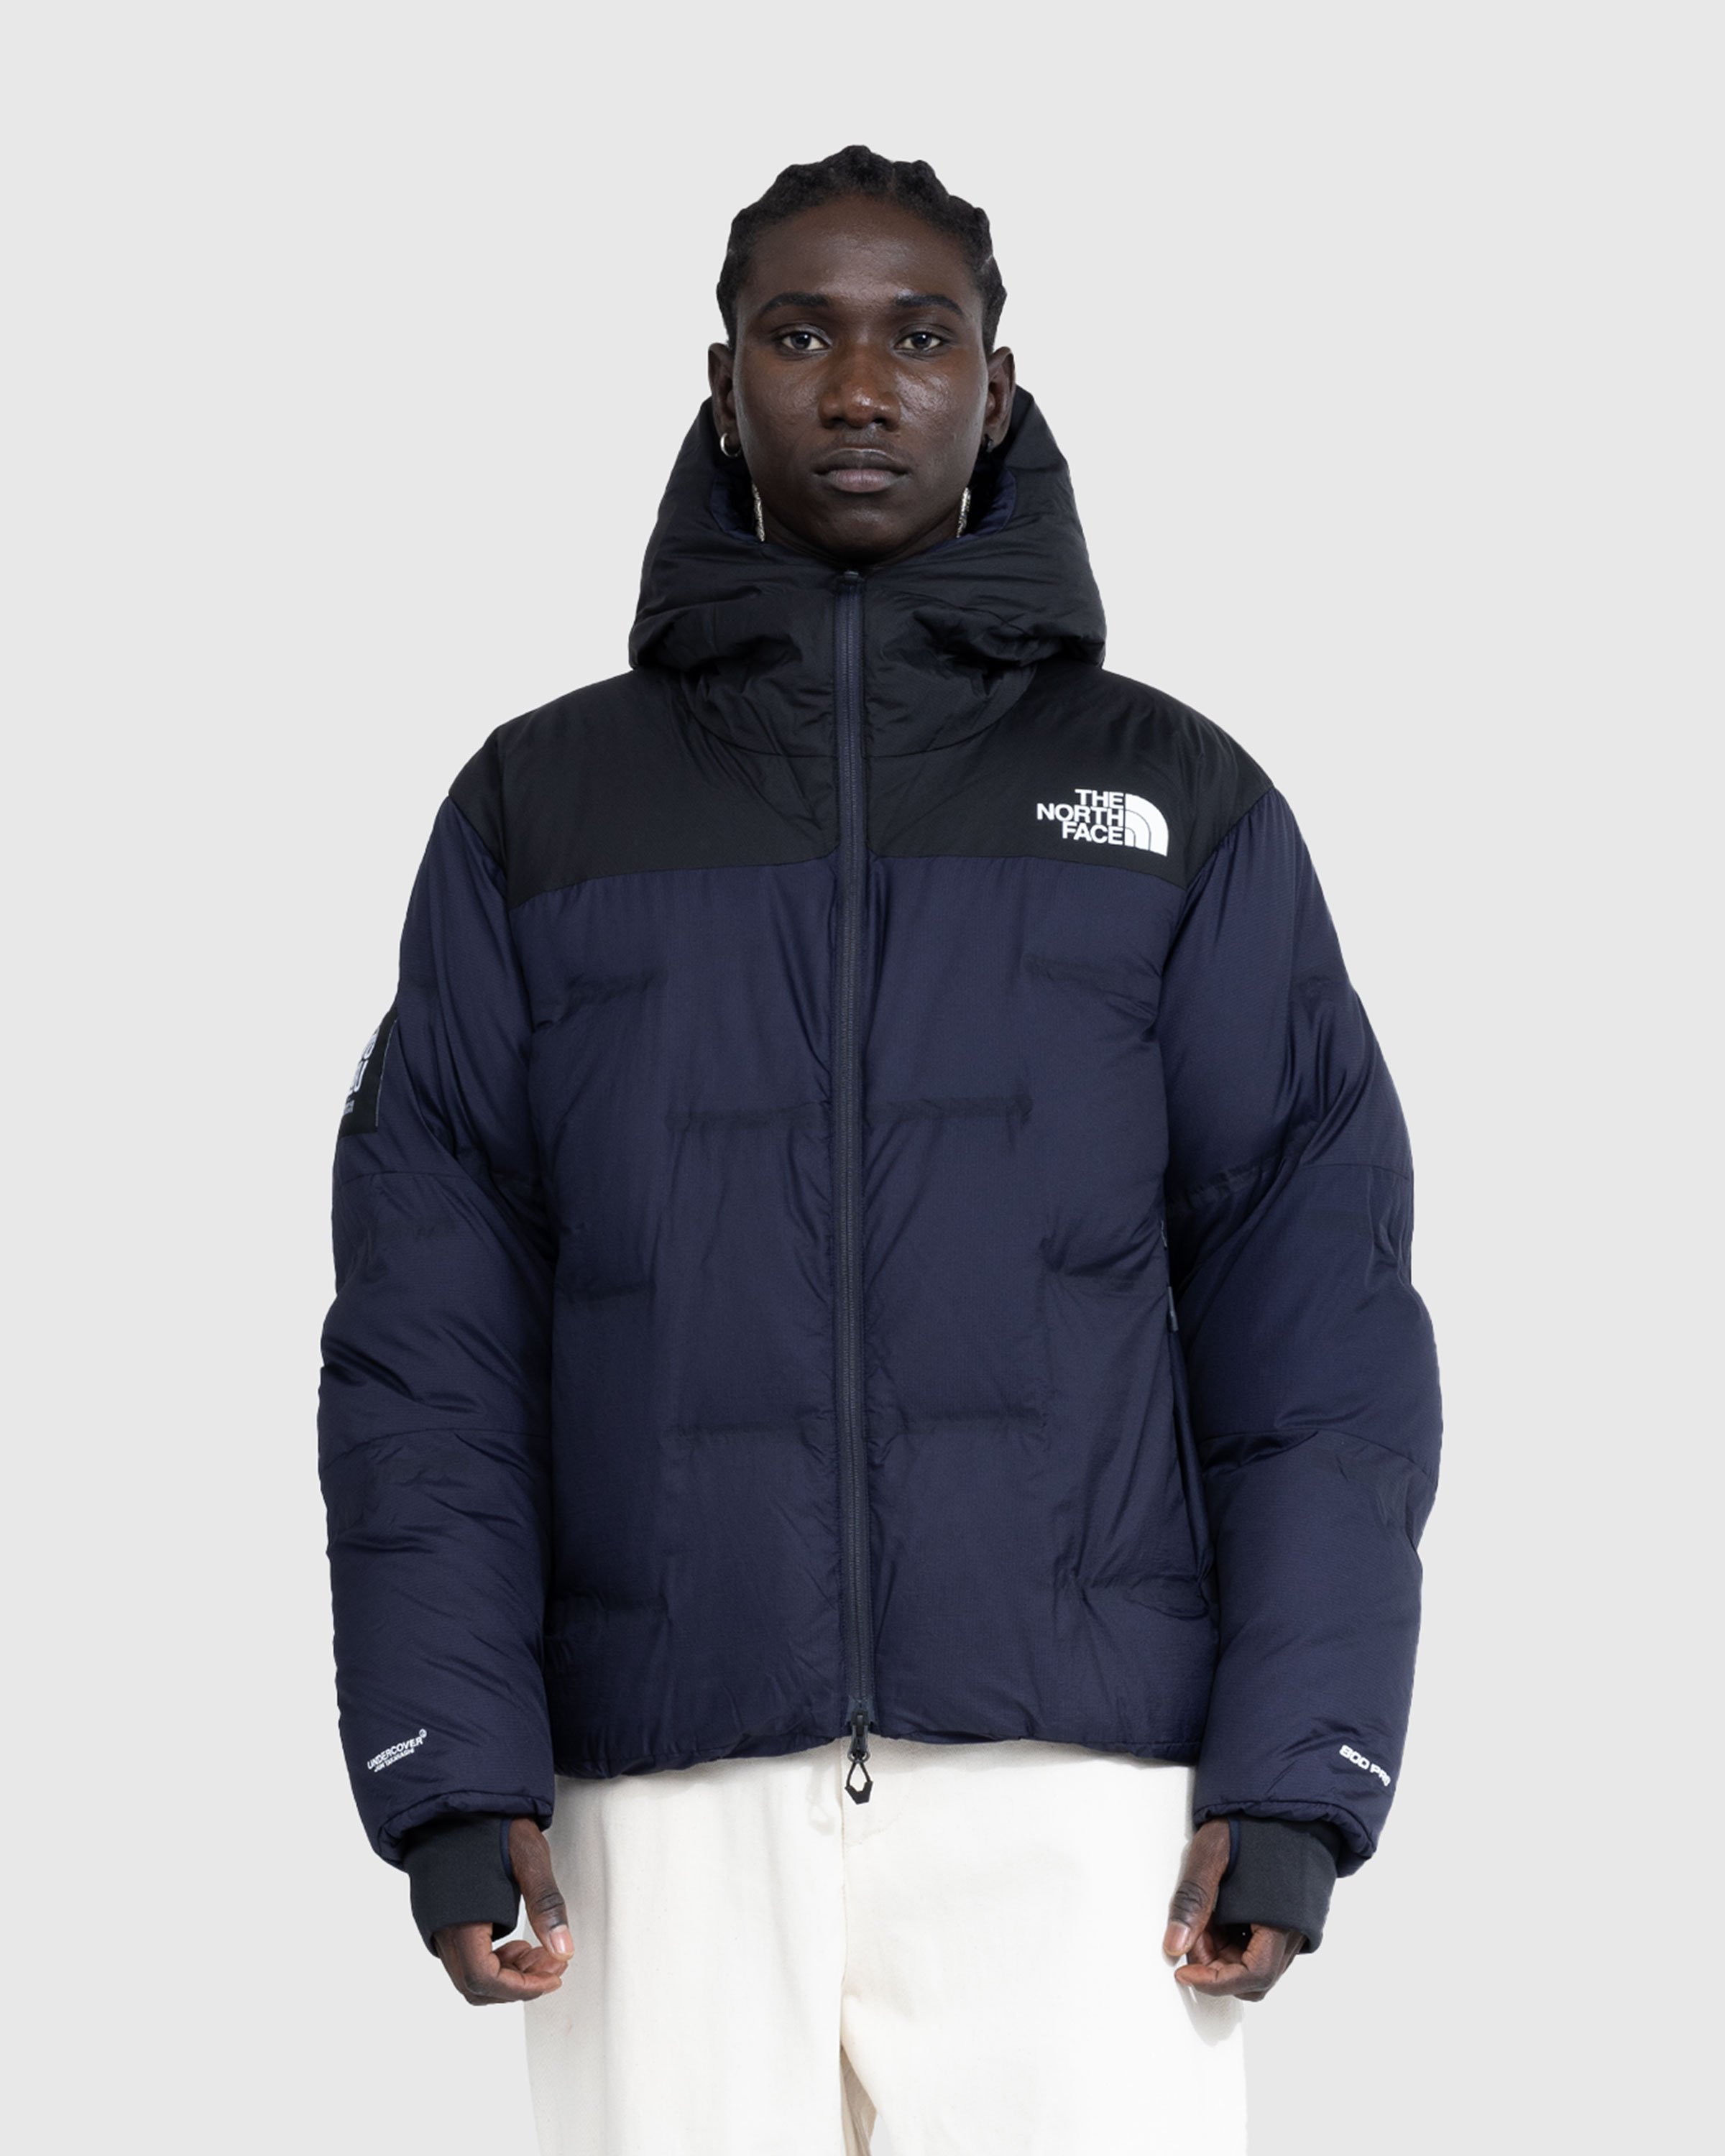 The North Face x UNDERCOVER - Soukuu Cloud Down Nupste Parka Black/Navy - Clothing - Multi - Image 2